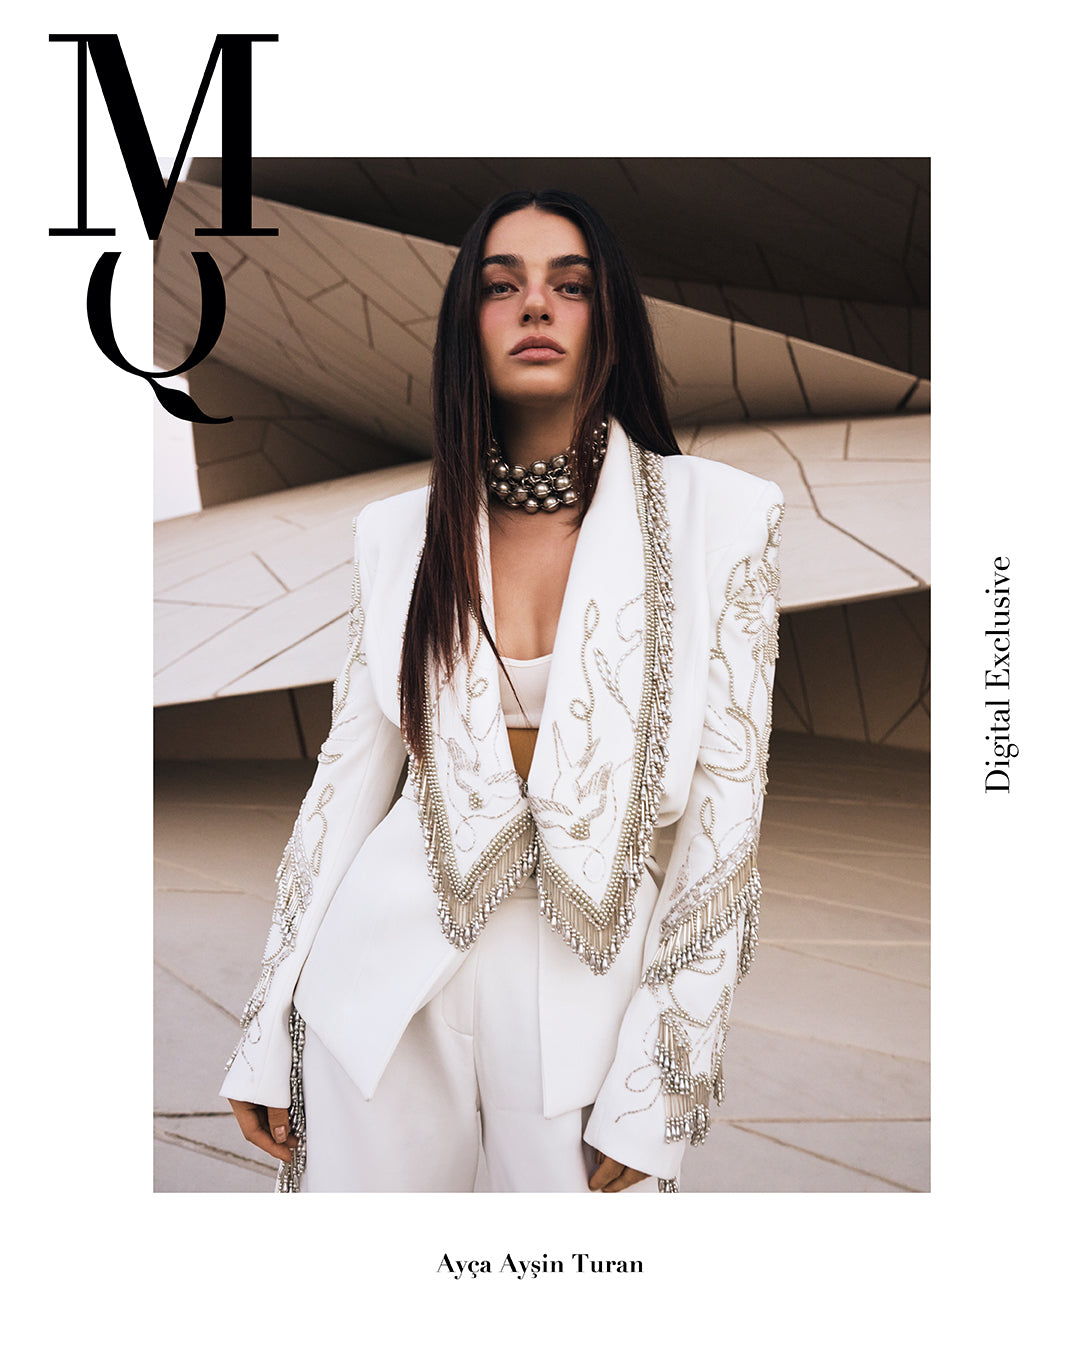 Ayça Ayşin Turan looking beautiful in Zeynep Tosun Couture for Magnet Quarterly, Digital Exclusive